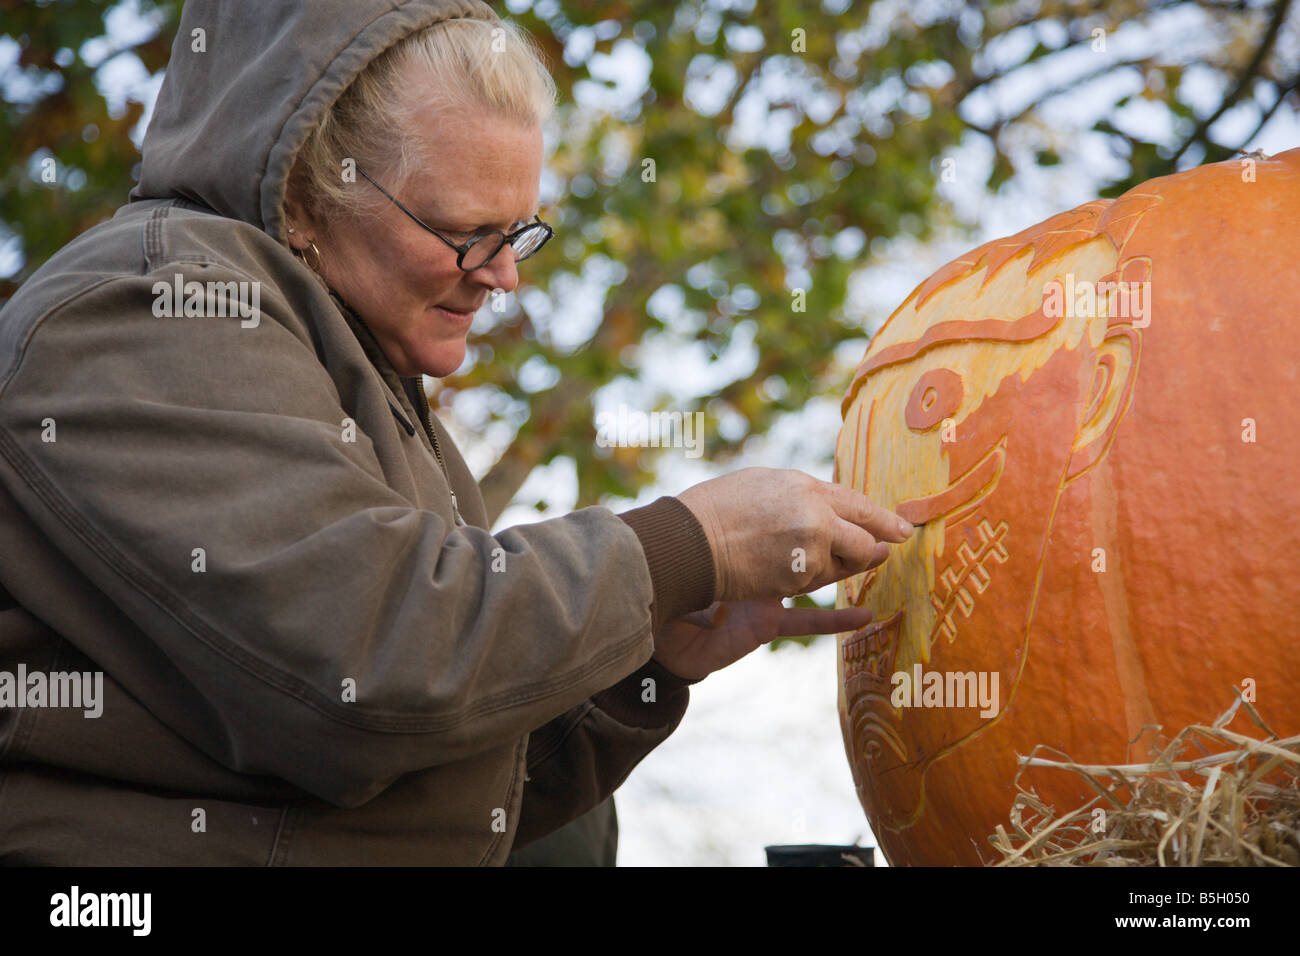 A woman from Nalls Farm Market carves a pumpkin at the 2008 Shenandoah Valley Hot Air Balloon and Wine Festival in Virginia. Stock Photo